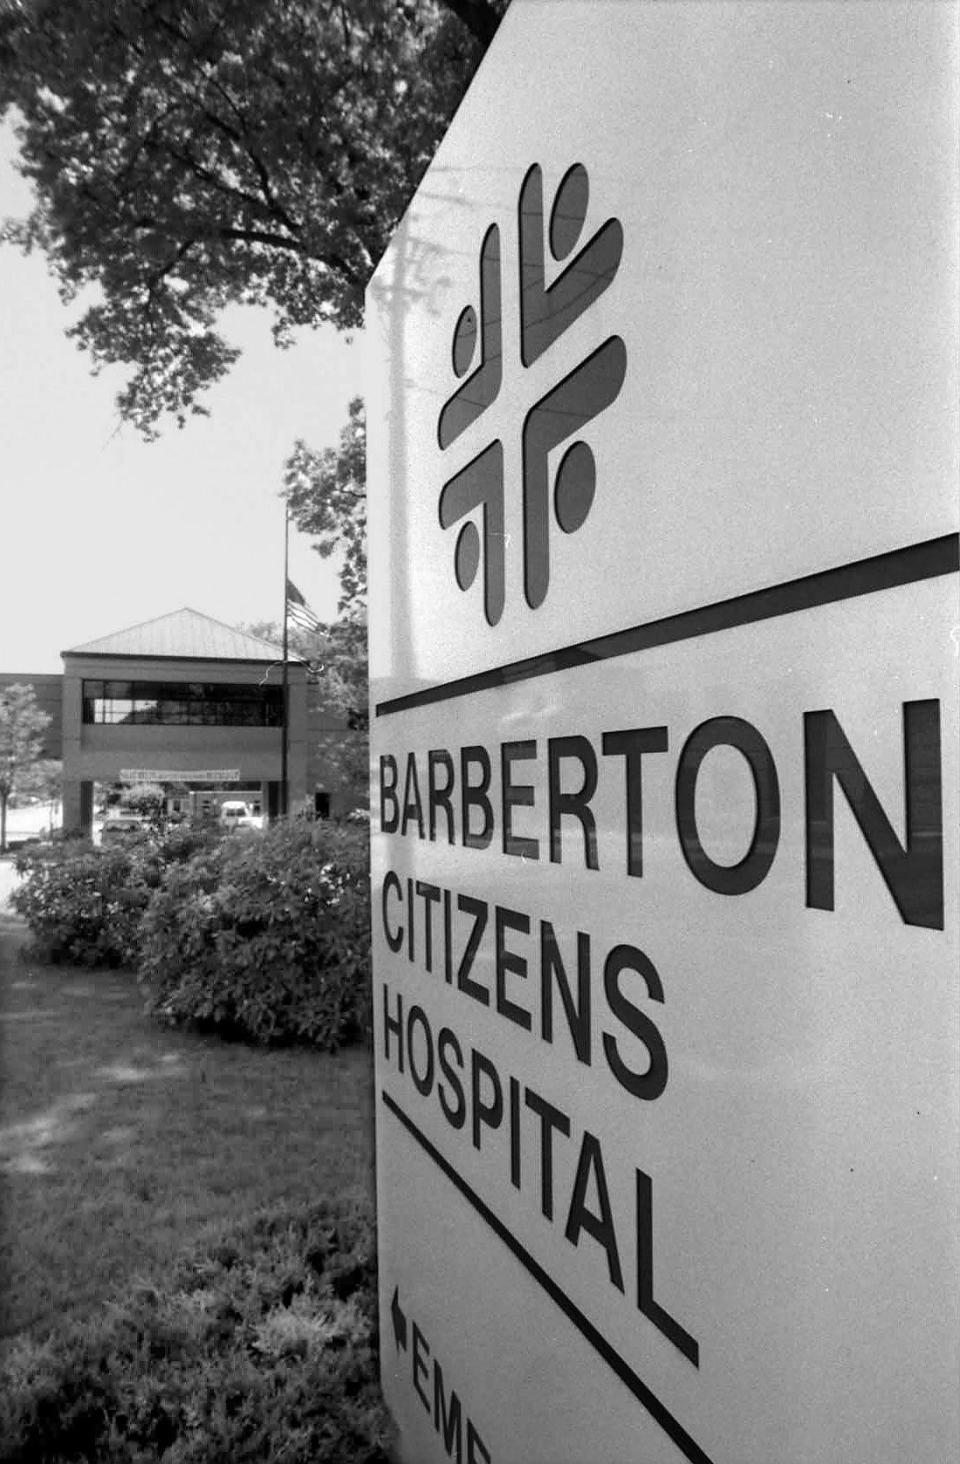 The proceeds from the sale of Barberton Citizens Hospital went to the Barberton Community Foundation, which paid for a new high school for the community.